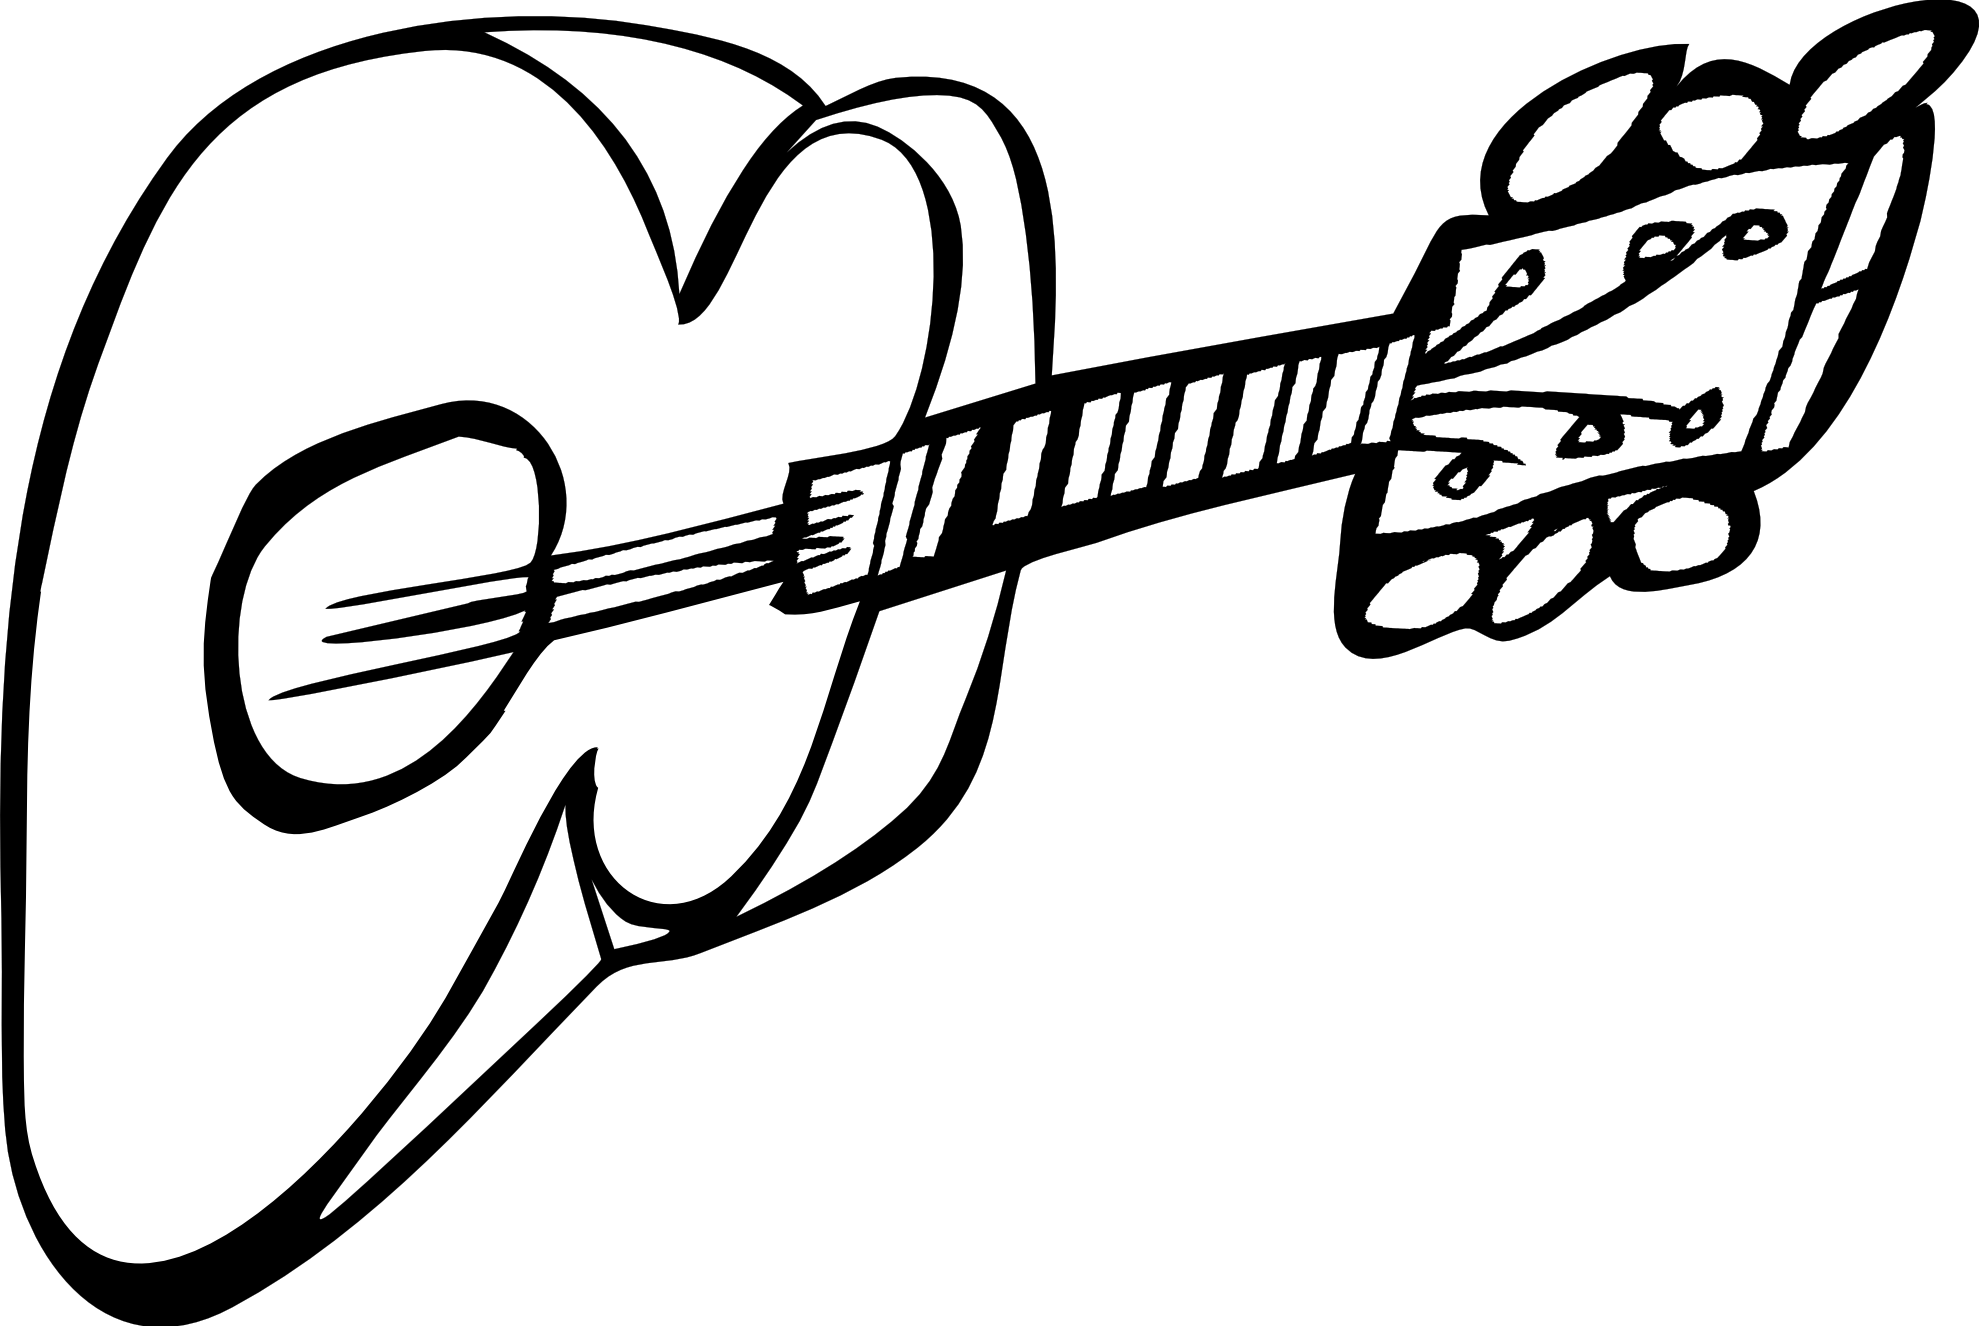 Acoustic Guitar Clipart Black And White | Clipart Panda - Free ...